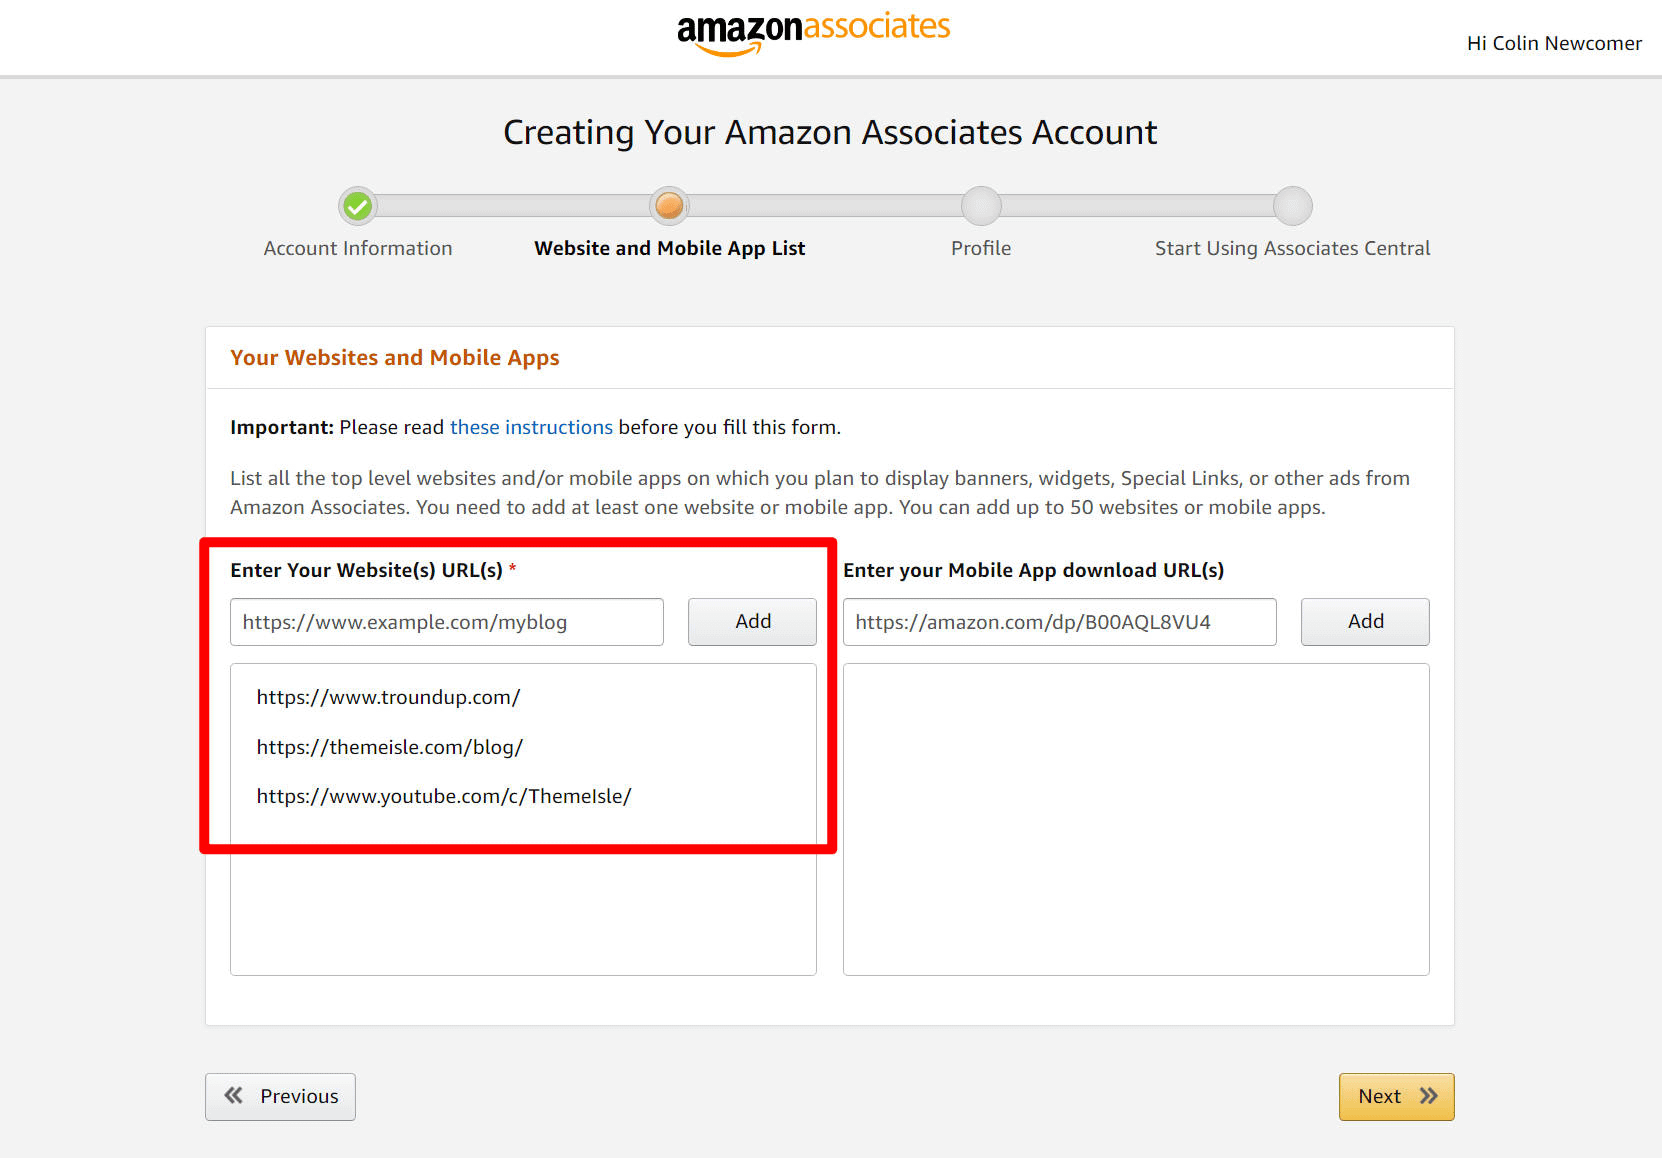 Add the websites where you'll promote Amazon products